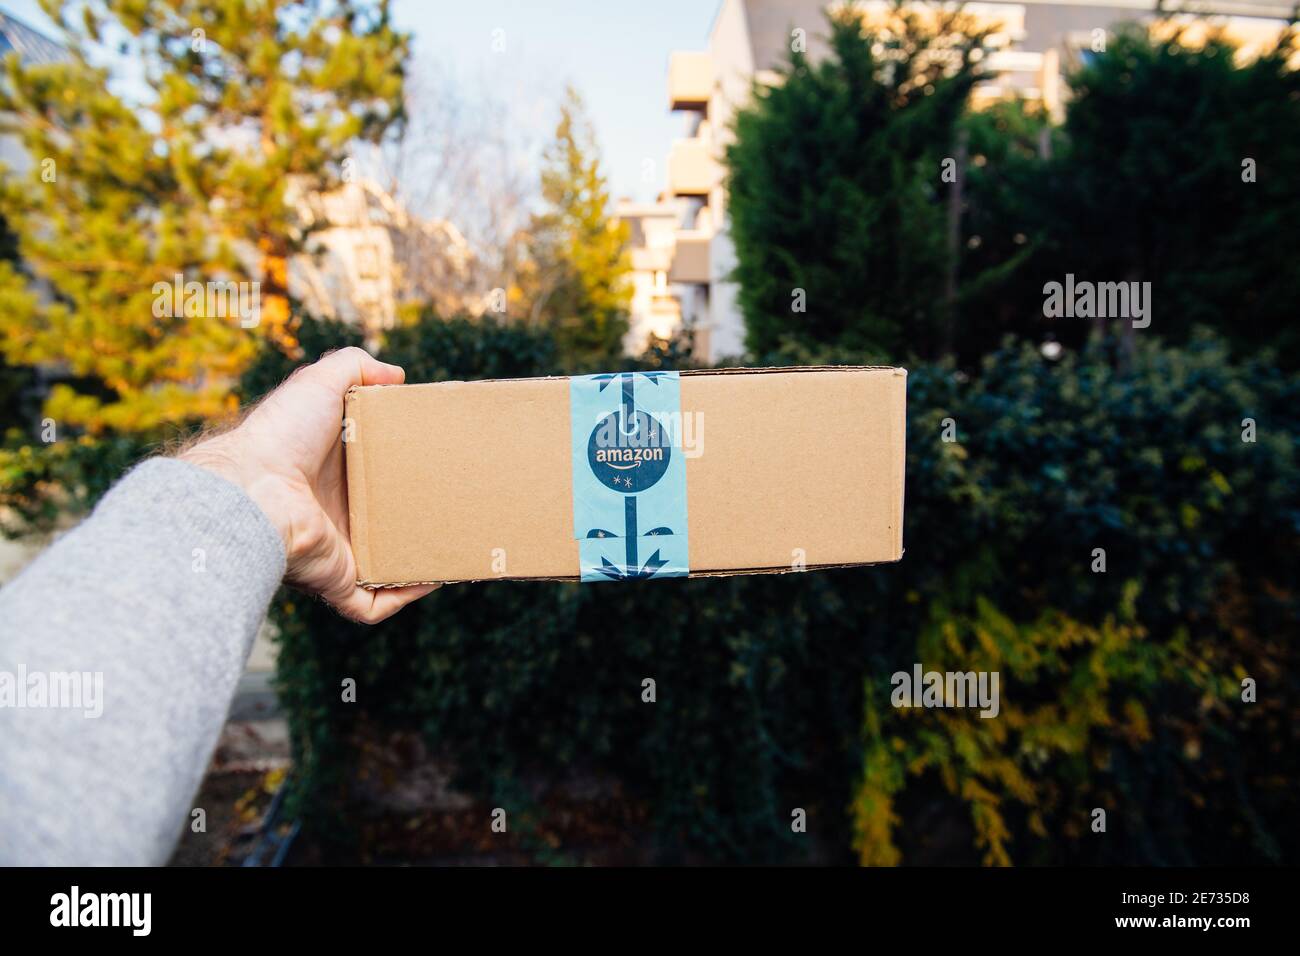 Paris, France - Nov 16, 2018: POV personal perspective male hand holding showing Amazon Prime cardboard with festive holiday scotch tape - defocused city background Stock Photo